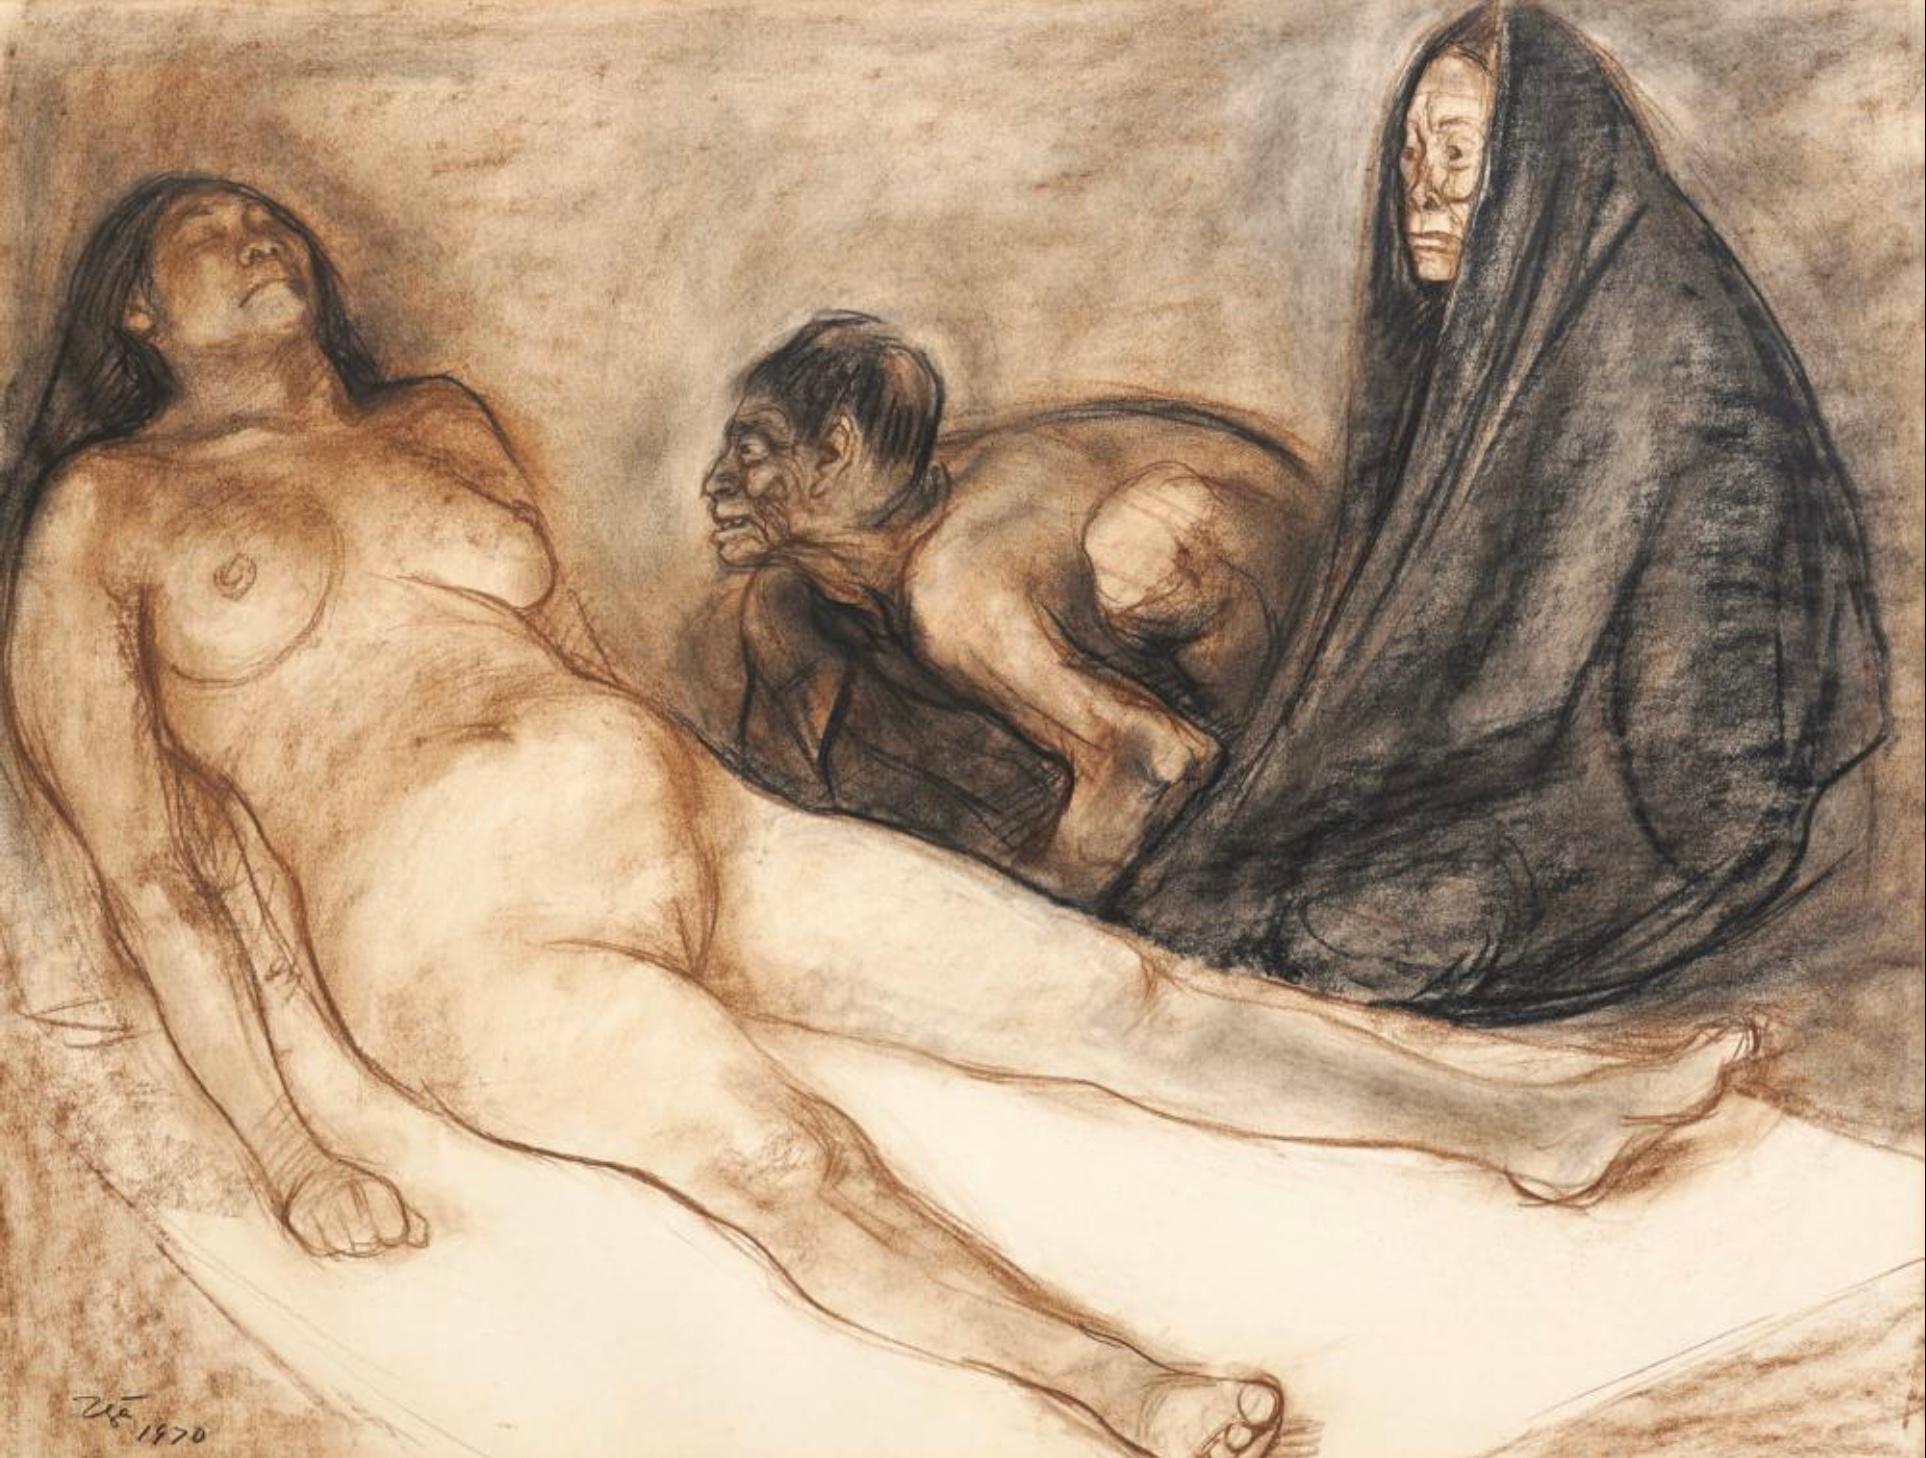 Francisco Zuniga, Mexican (1912-1998). 'Brujeria', sepia and black charcoal on paper. I spoke with Ariel Zuniga and he was very impressed by this painting saying three or more figures is rare. The scene is of a mother and sick daughter with a witch